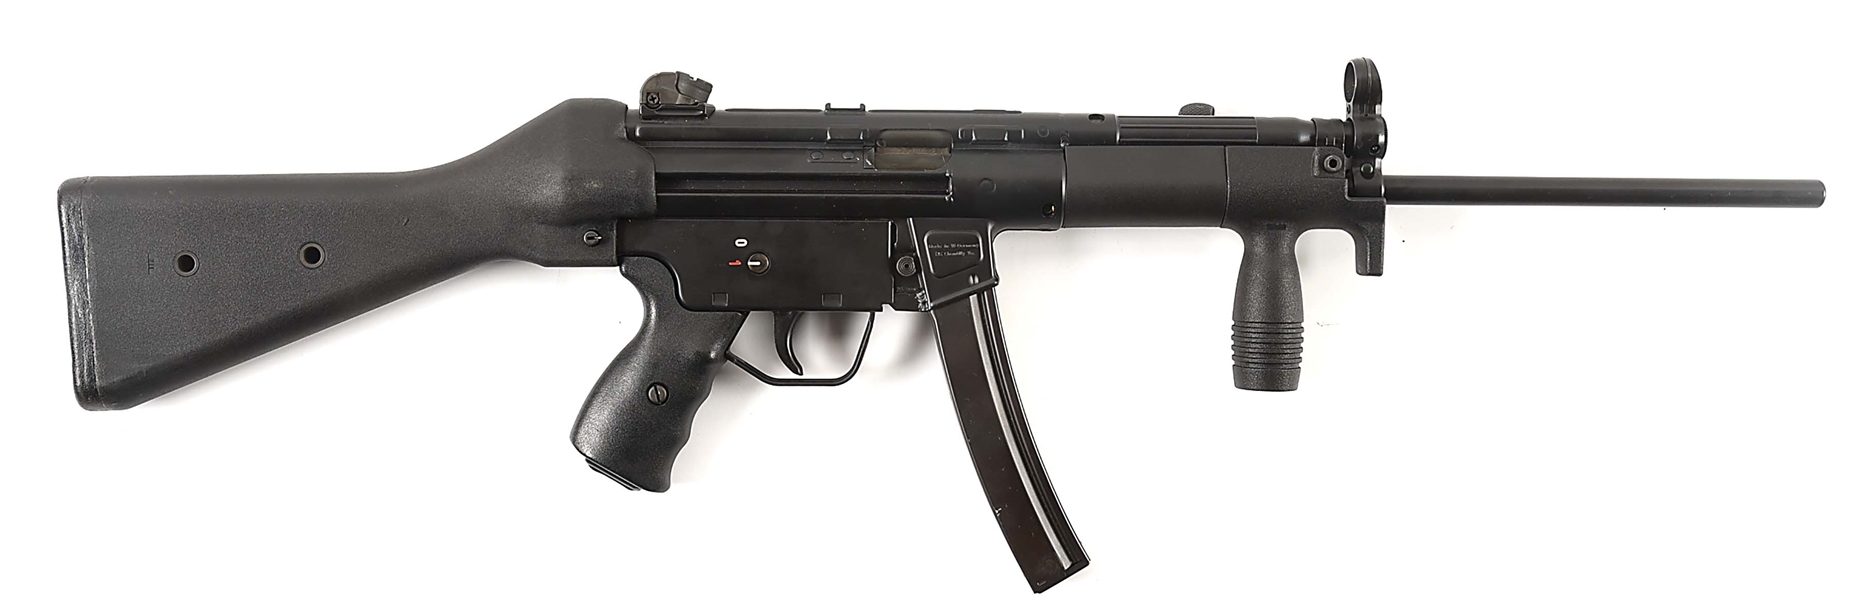 (M) HK 94 9MM SEMI-AUTOMATIC RIFLE WITH MP5K FOREARM.